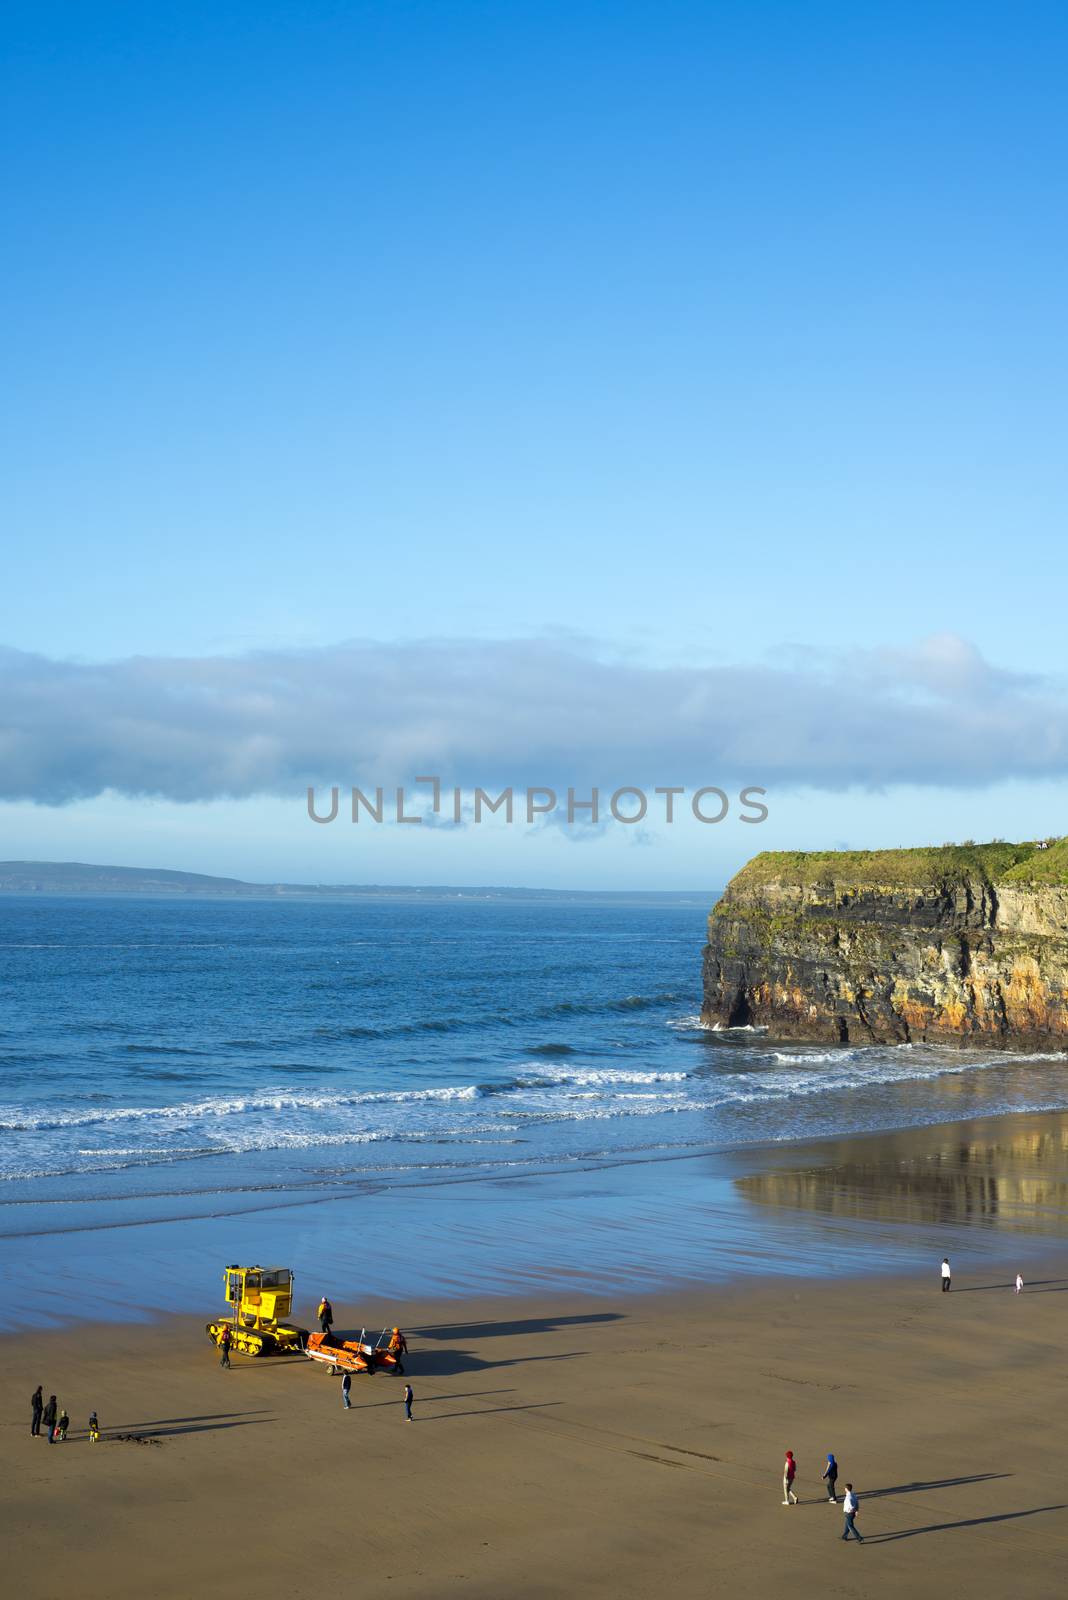 a semi-submersible vehicle towing sea rescue craft to the sea for launching in Ballybunion ireland